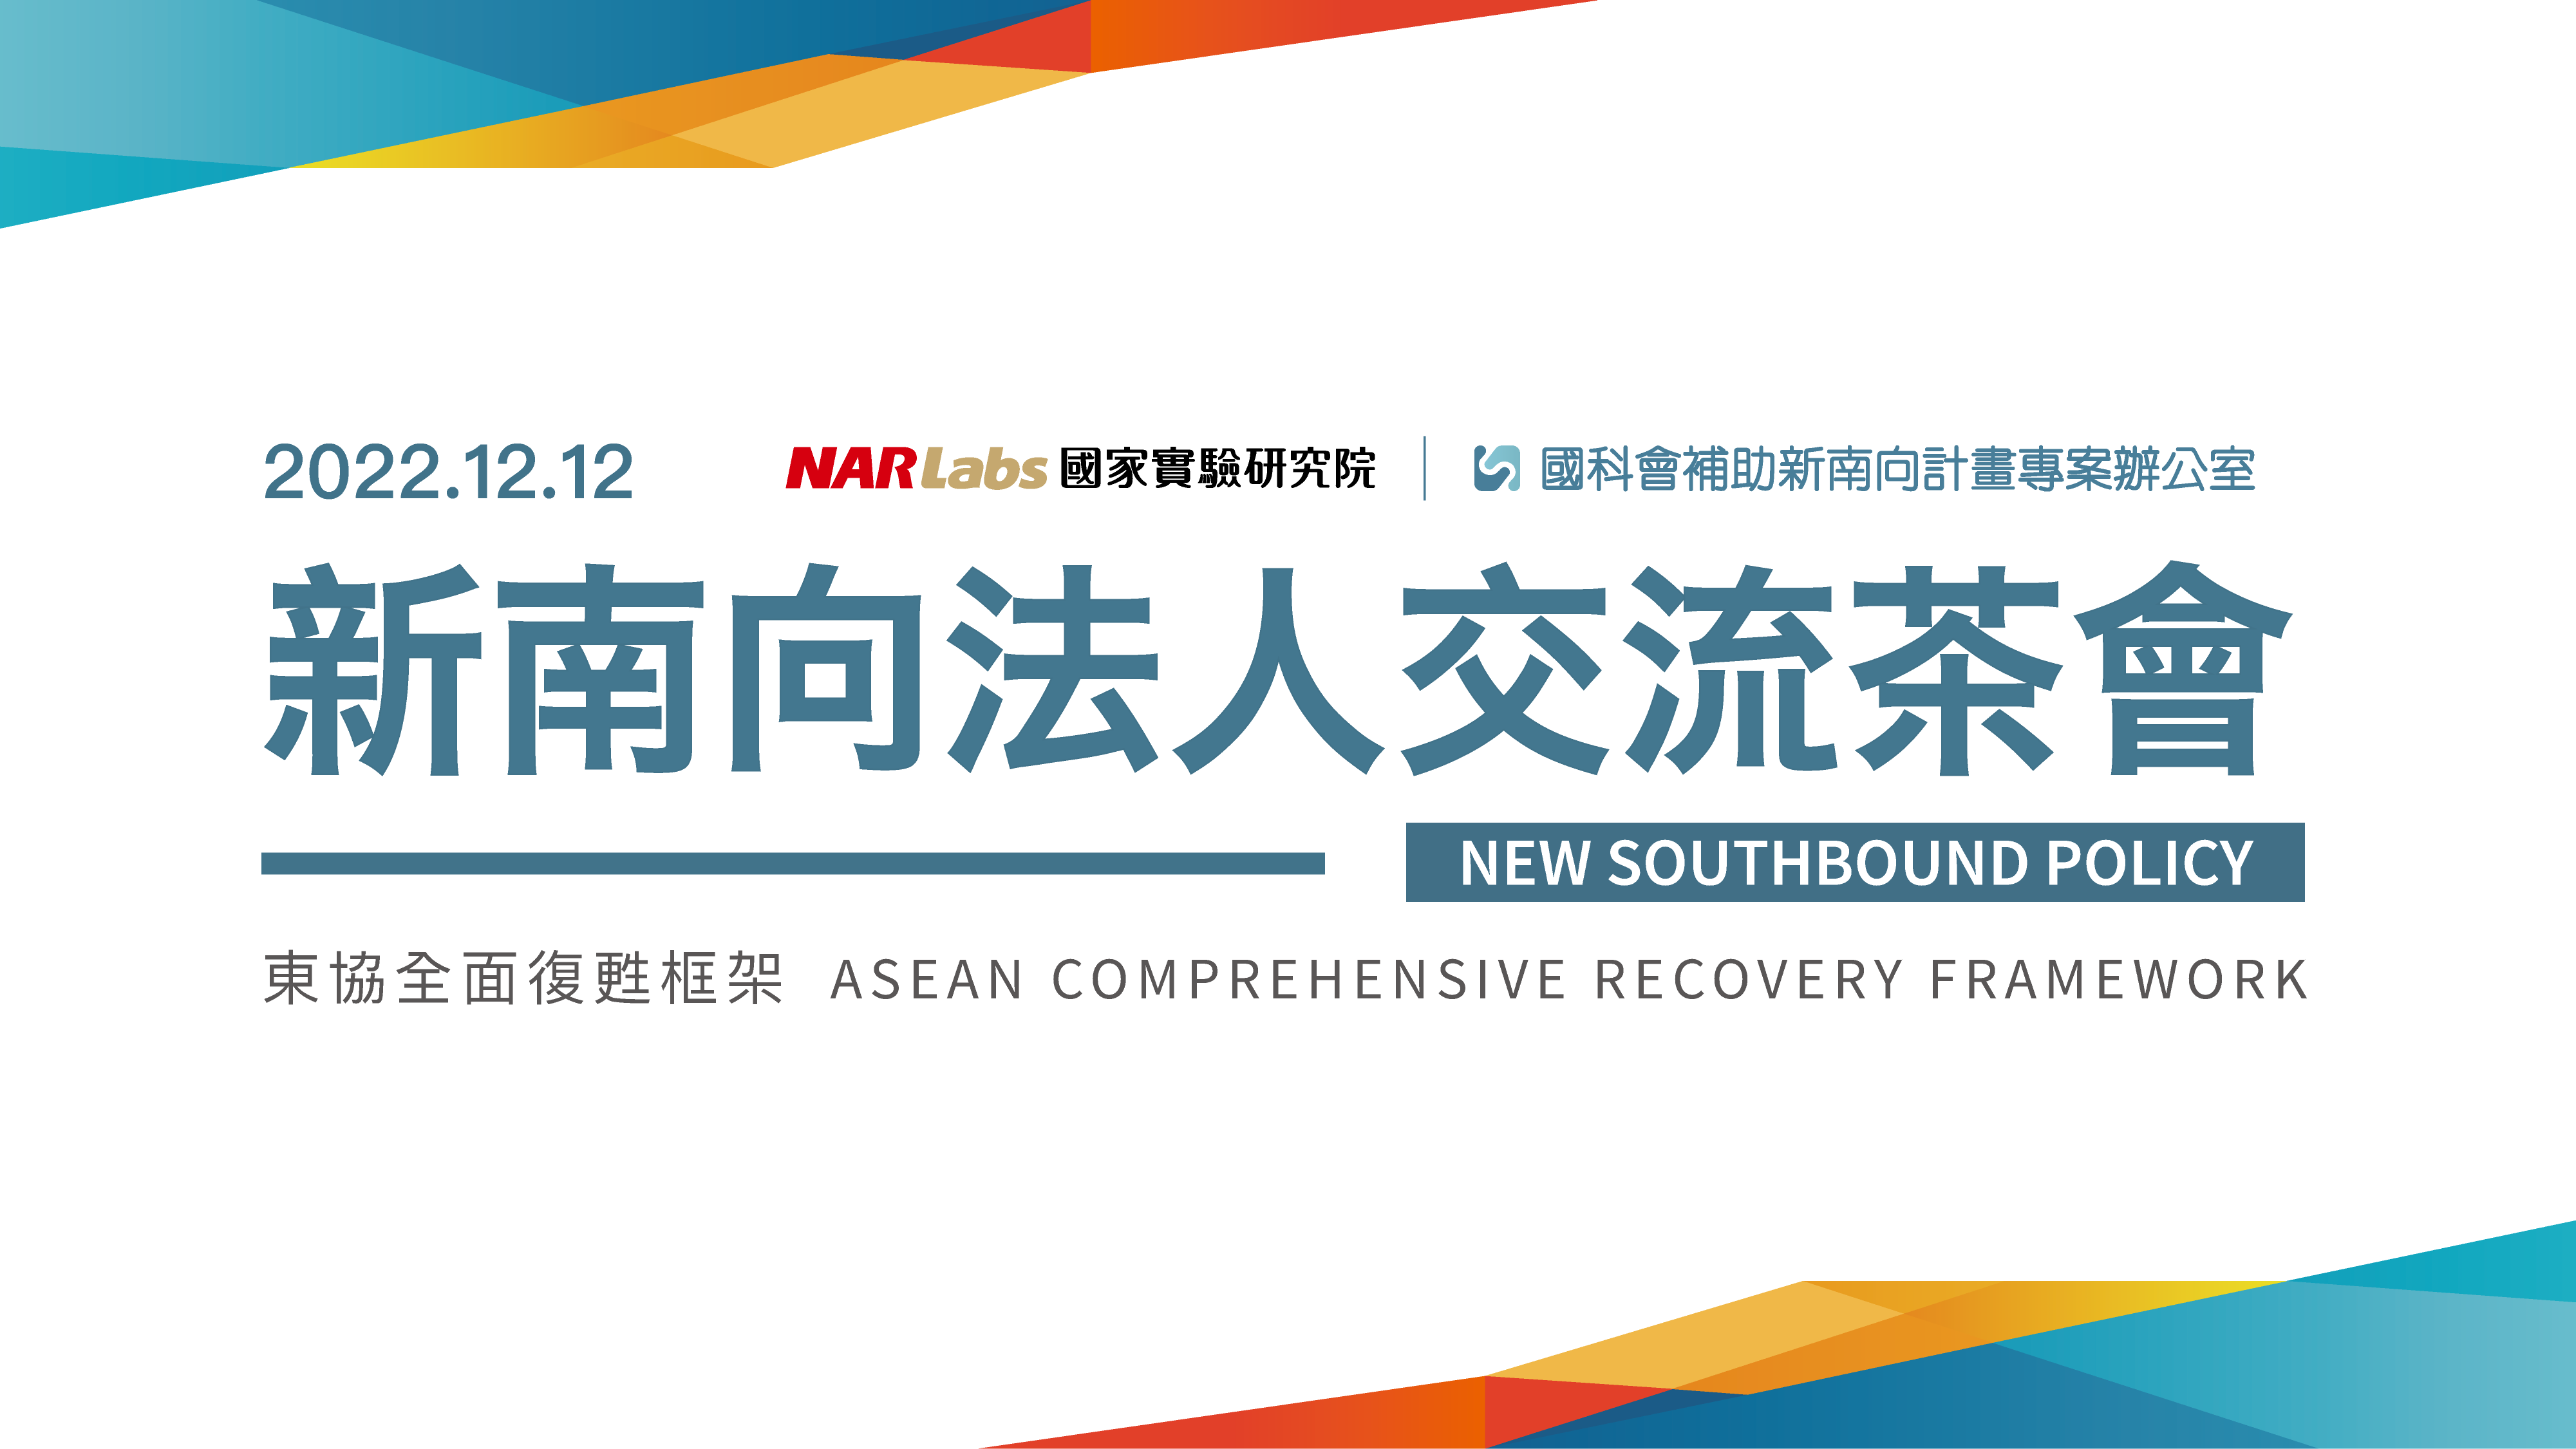 2022 New Southbound Seminar - ASEAN Comprehensive Recovery Framework's picture